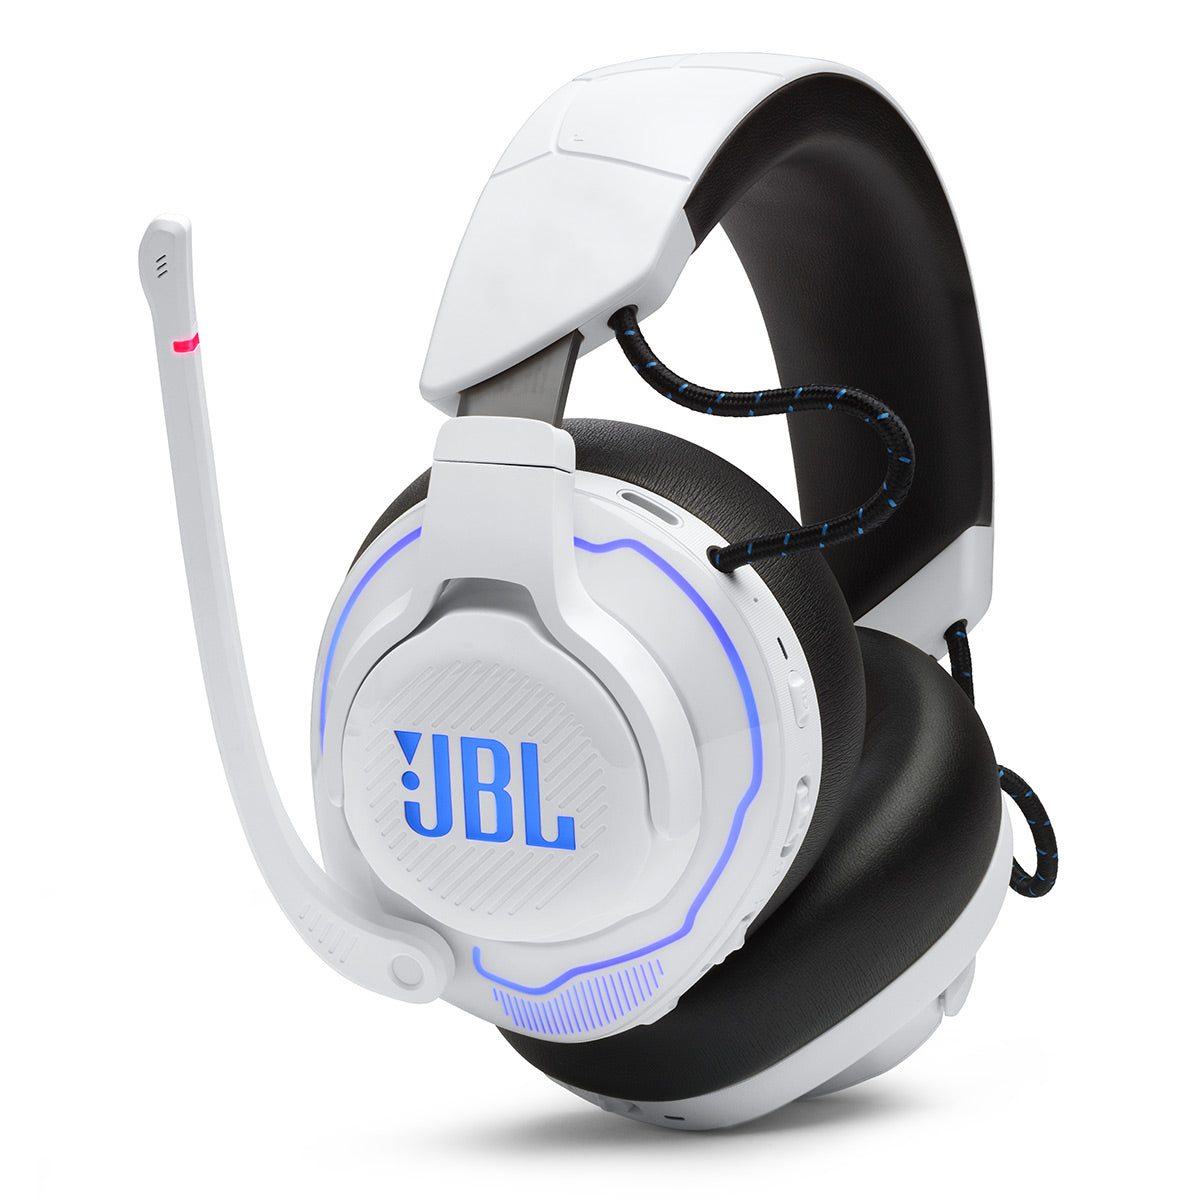 JBL Quantum 800 Wired Over-Ear Gaming Headset - Black for sale online